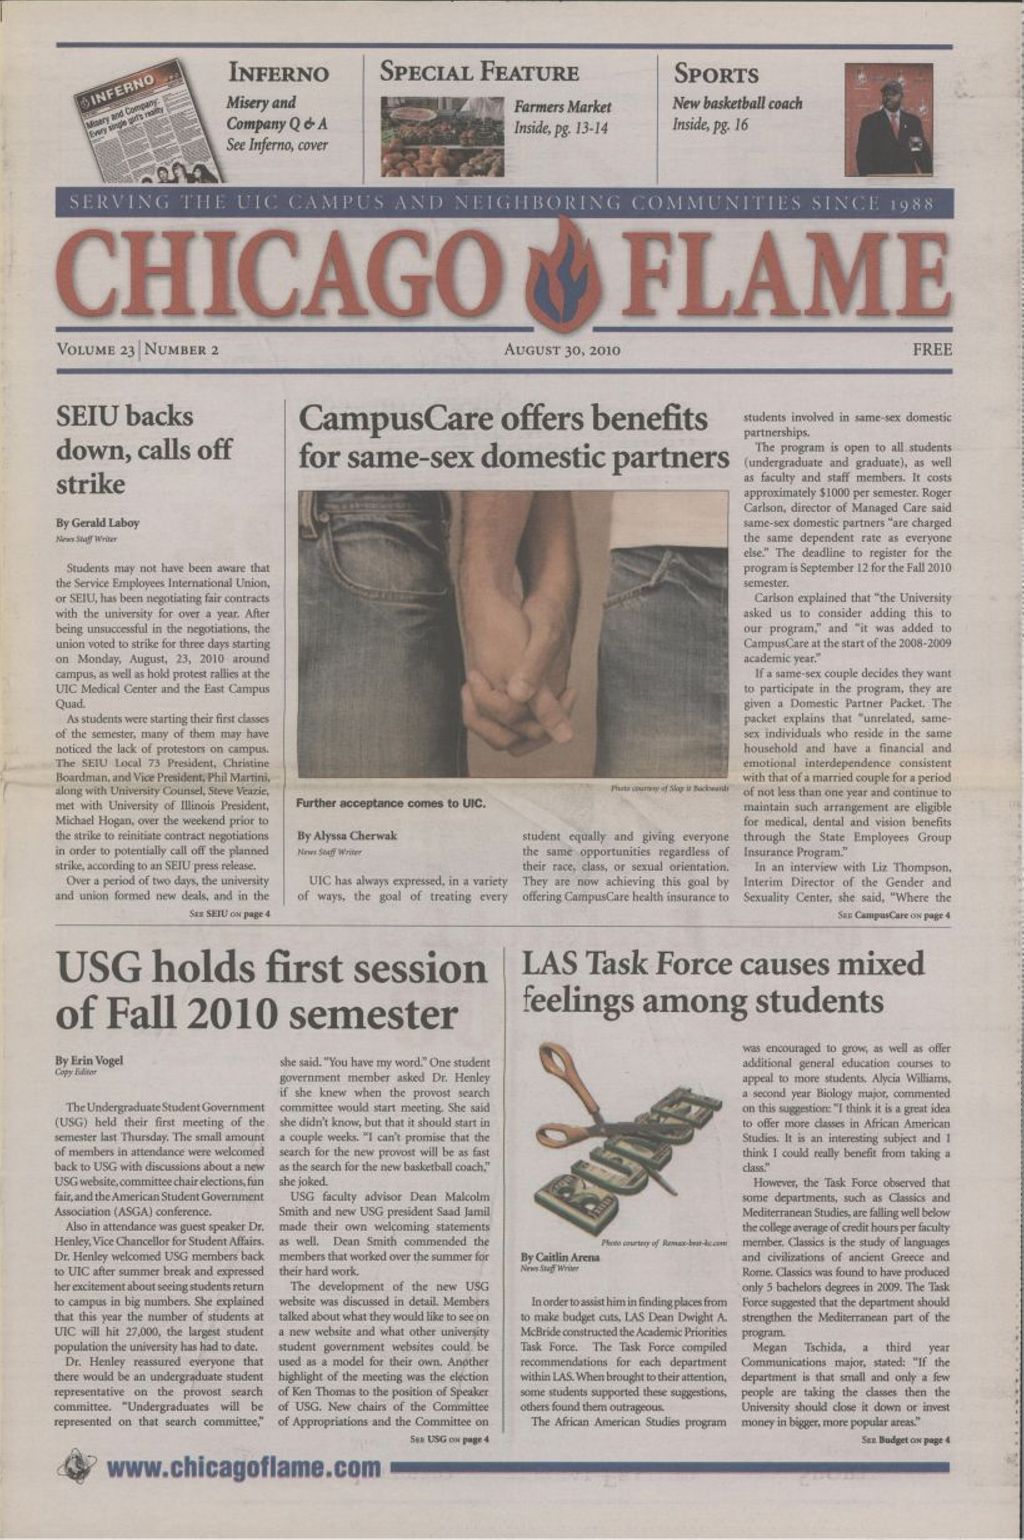 Miniature of Chicago Flame (August 30, 2010)